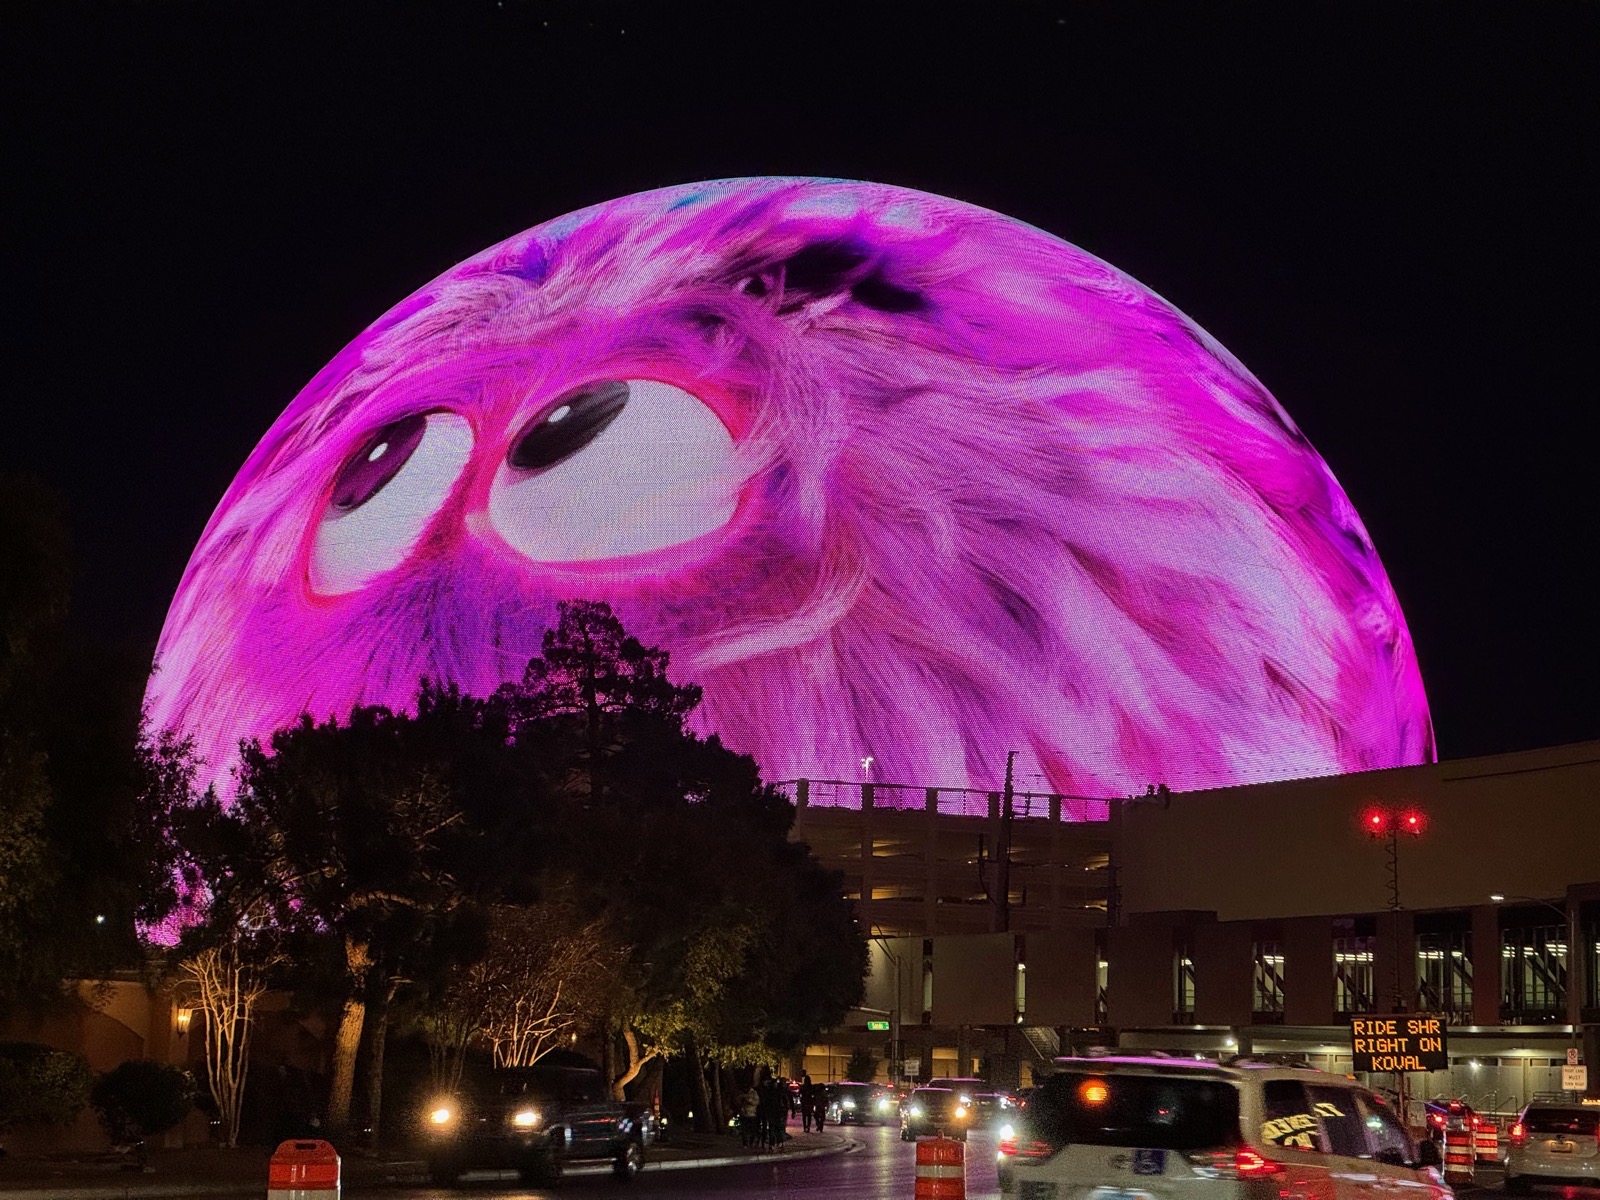 The Sphere looking like a giant pink furry playful monster with the city in the foreground and the black sky behind. The monster has big eyeballs that were moving around.